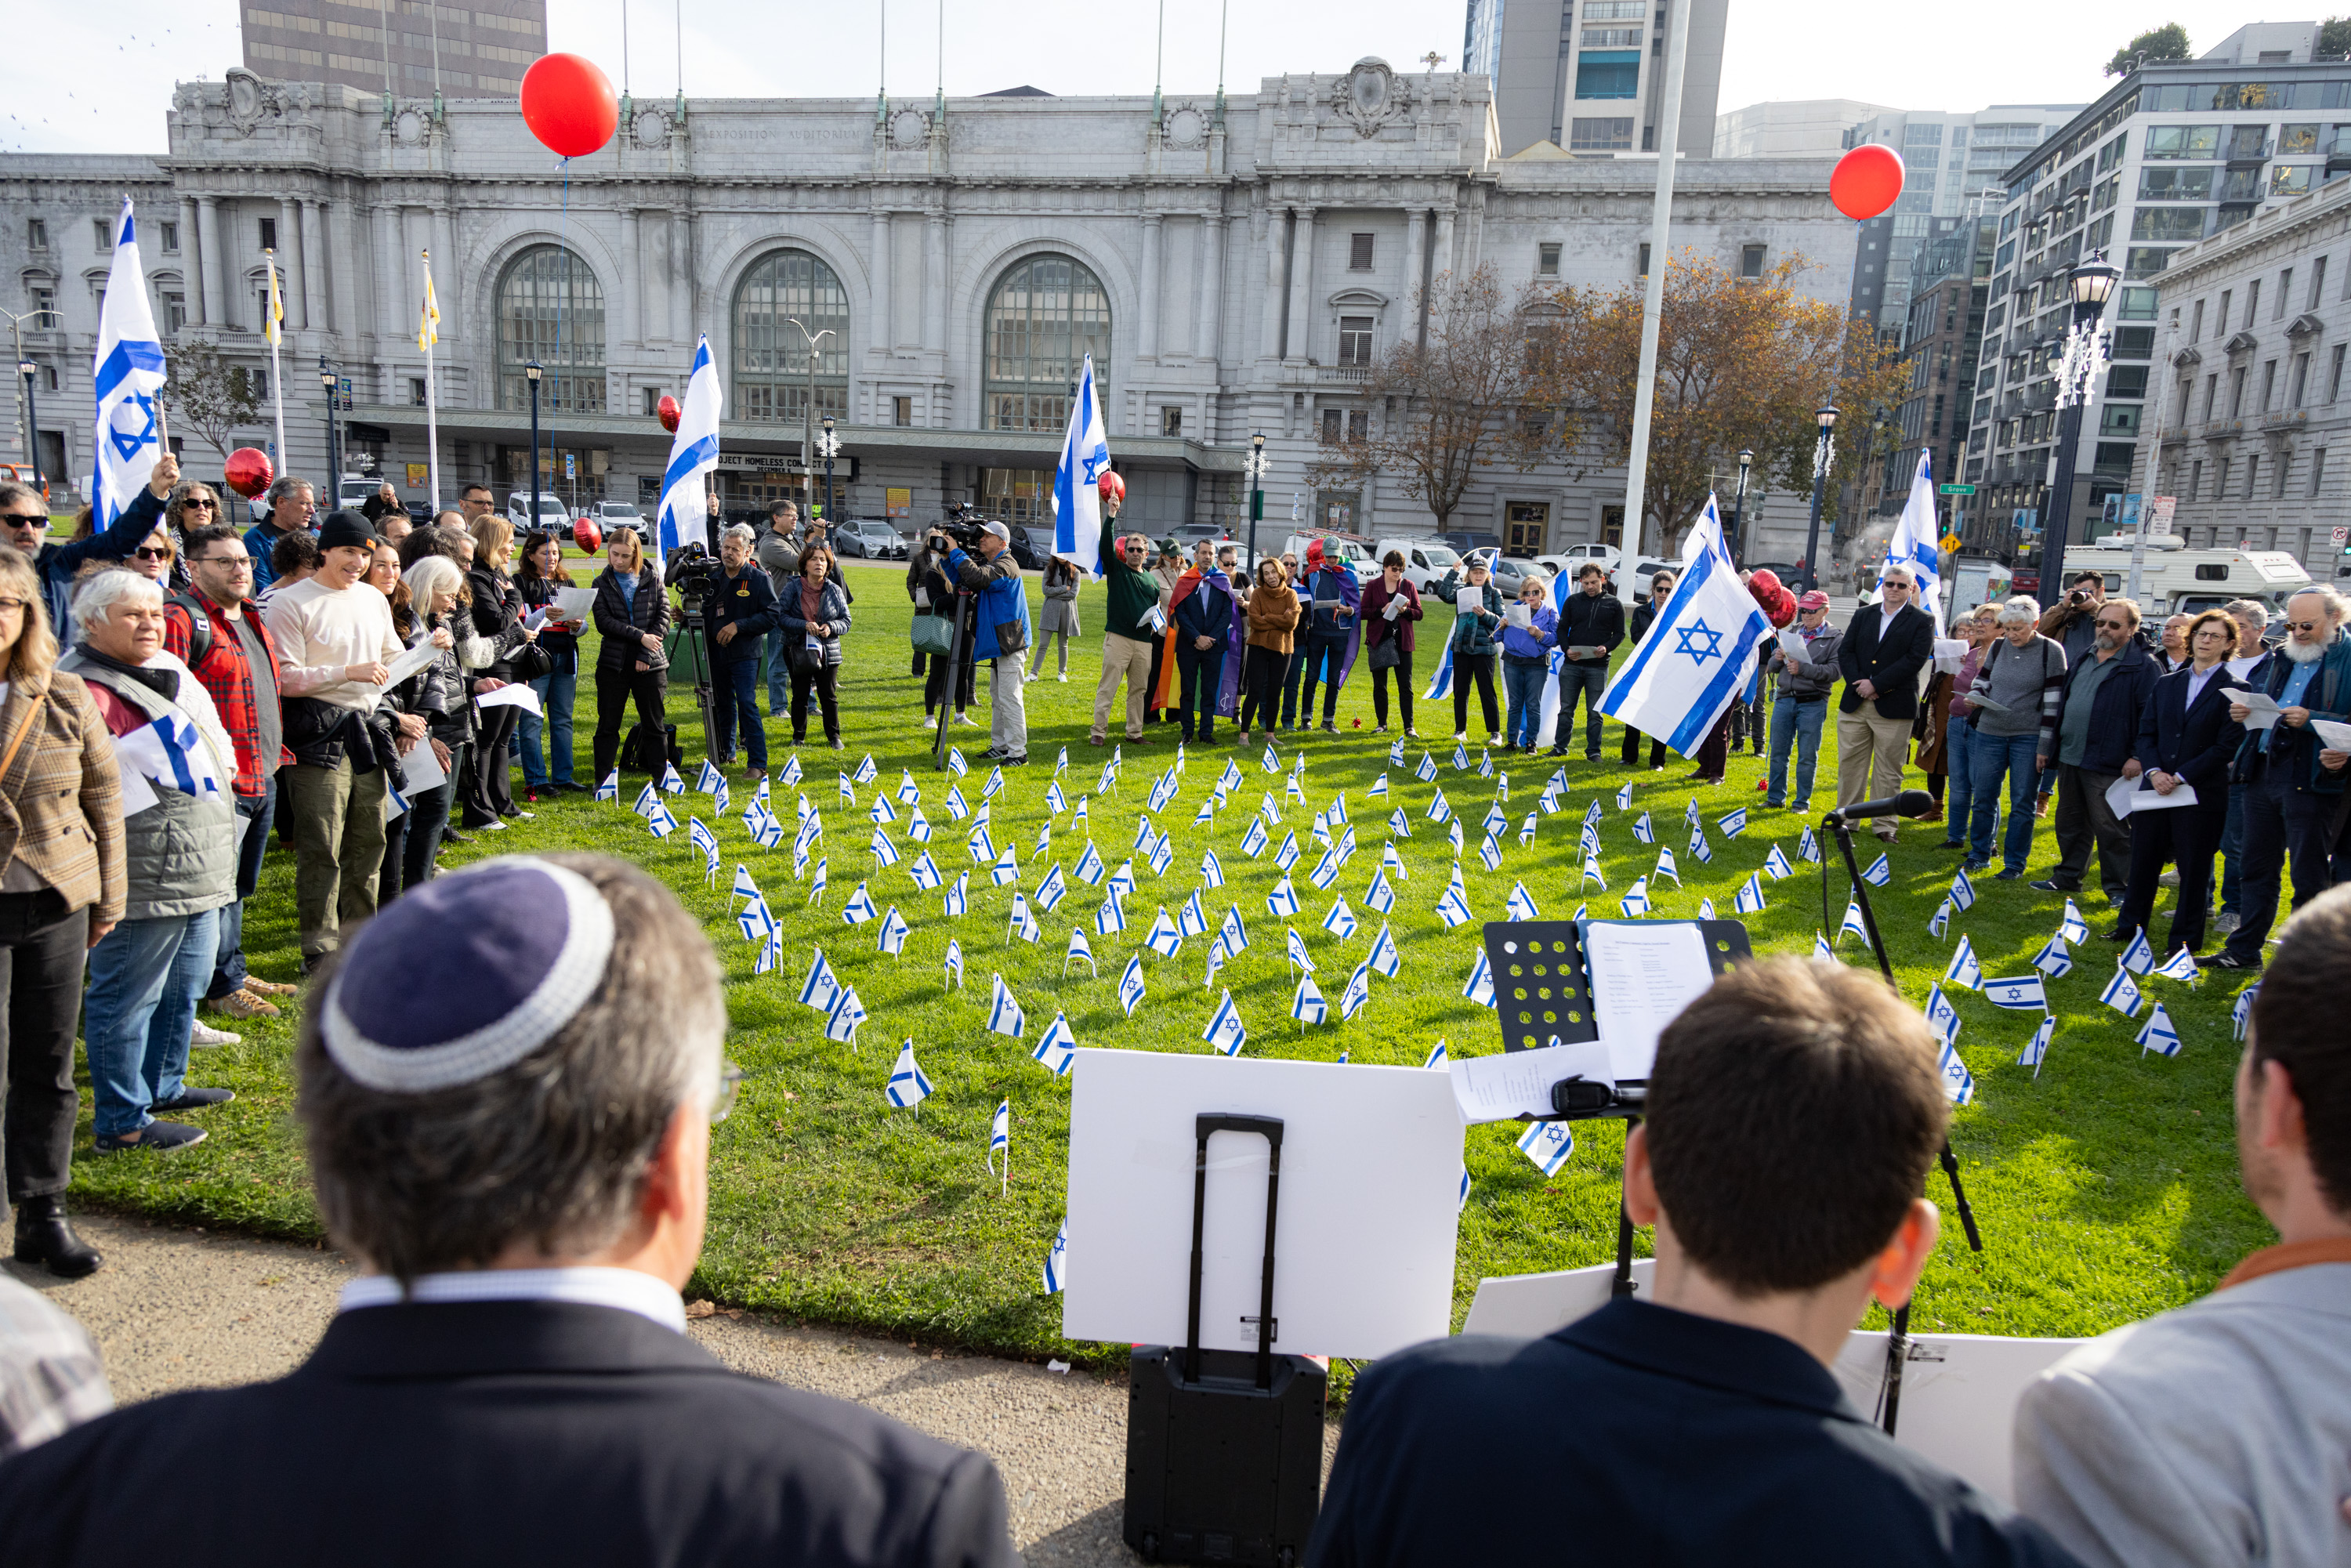 A large group of people gather outside San Francisco City Hall and waves white and blue flags of Israel. Over a hundred small Israeli flags are placed in the ground.